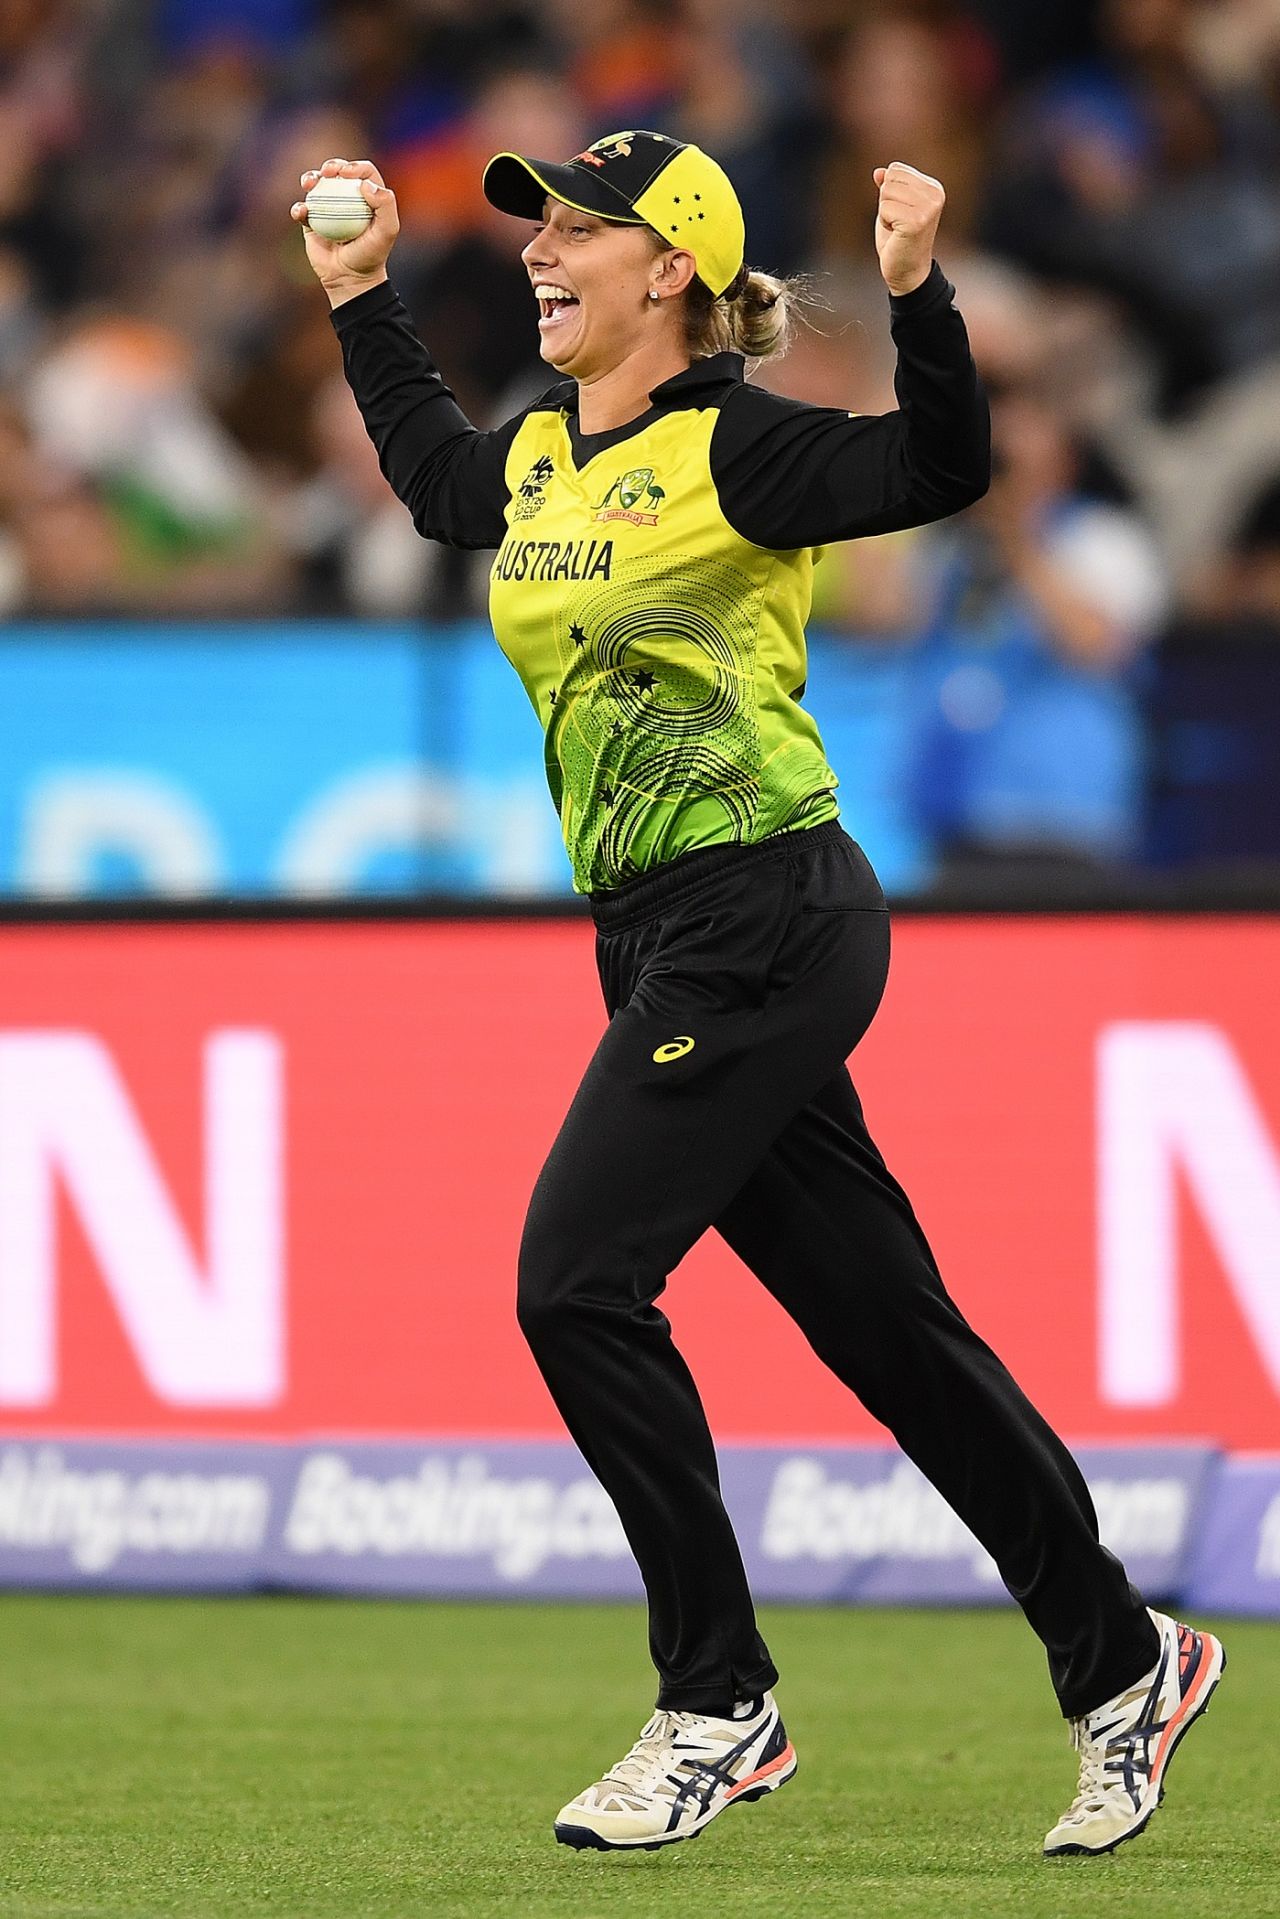 Australia were sharp with their catching, Australia v India, final, Women's T20 World Cup, Melbourne, March 8, 2020